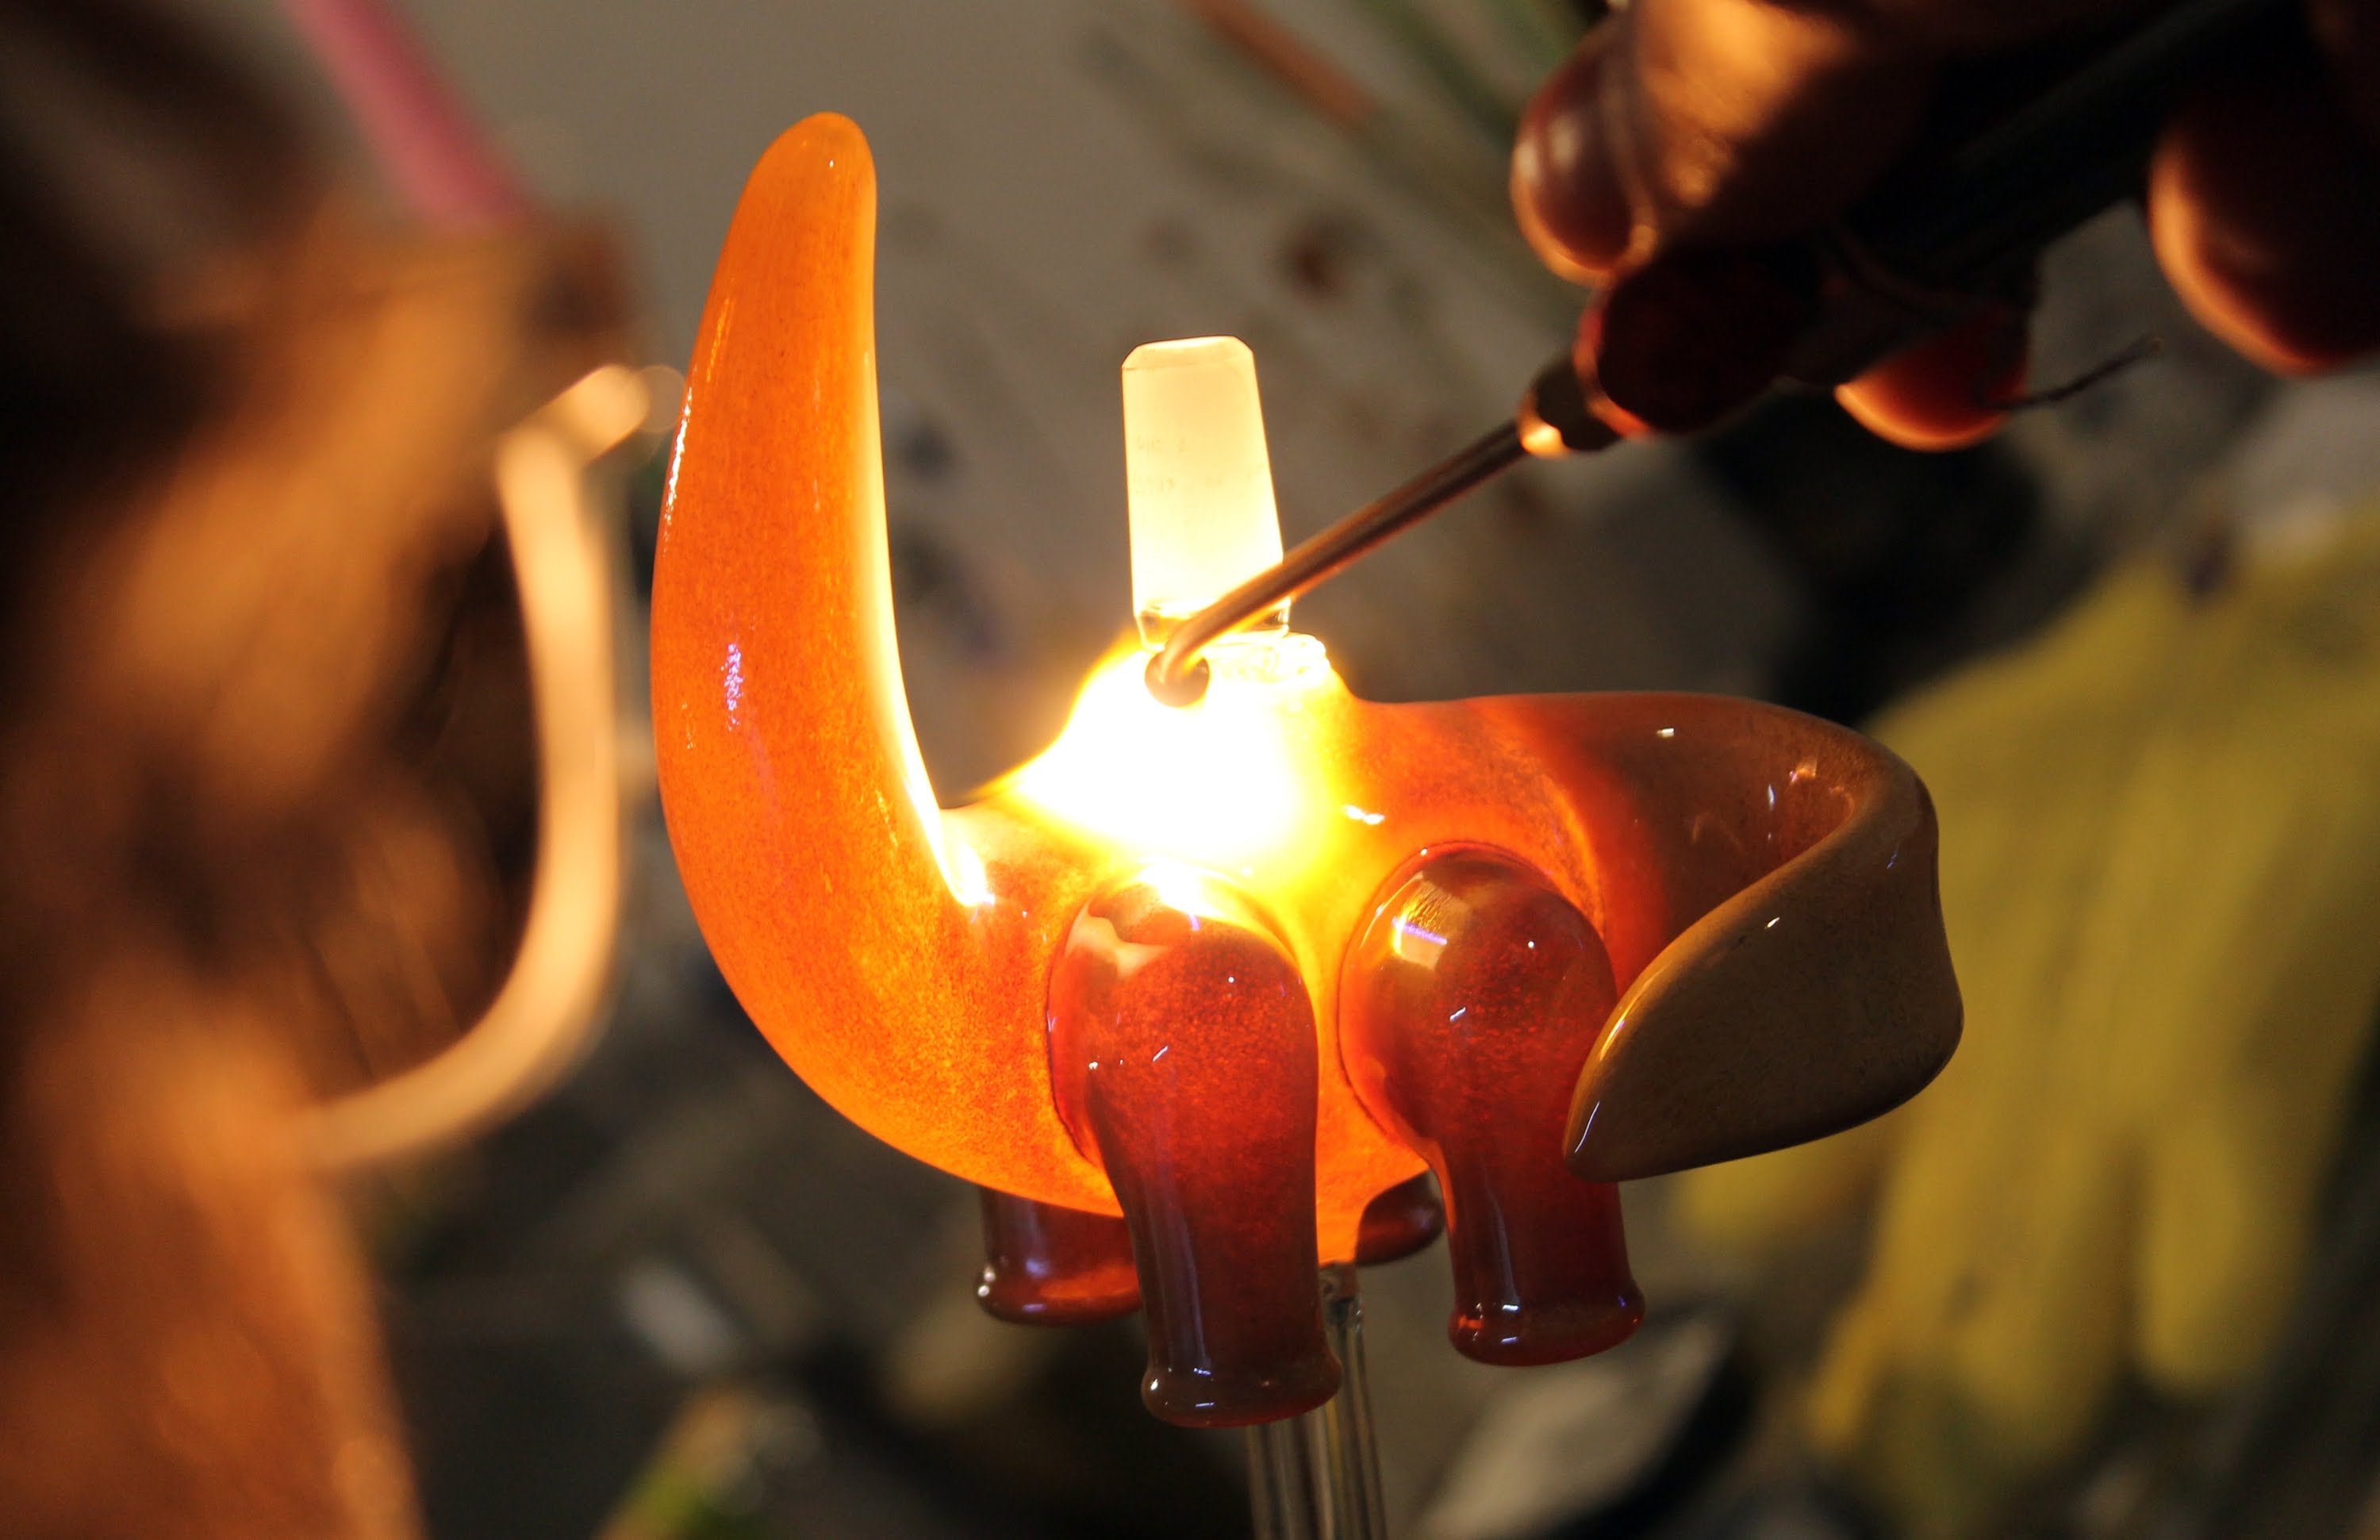 Artist Elbo fired up about glassblowing